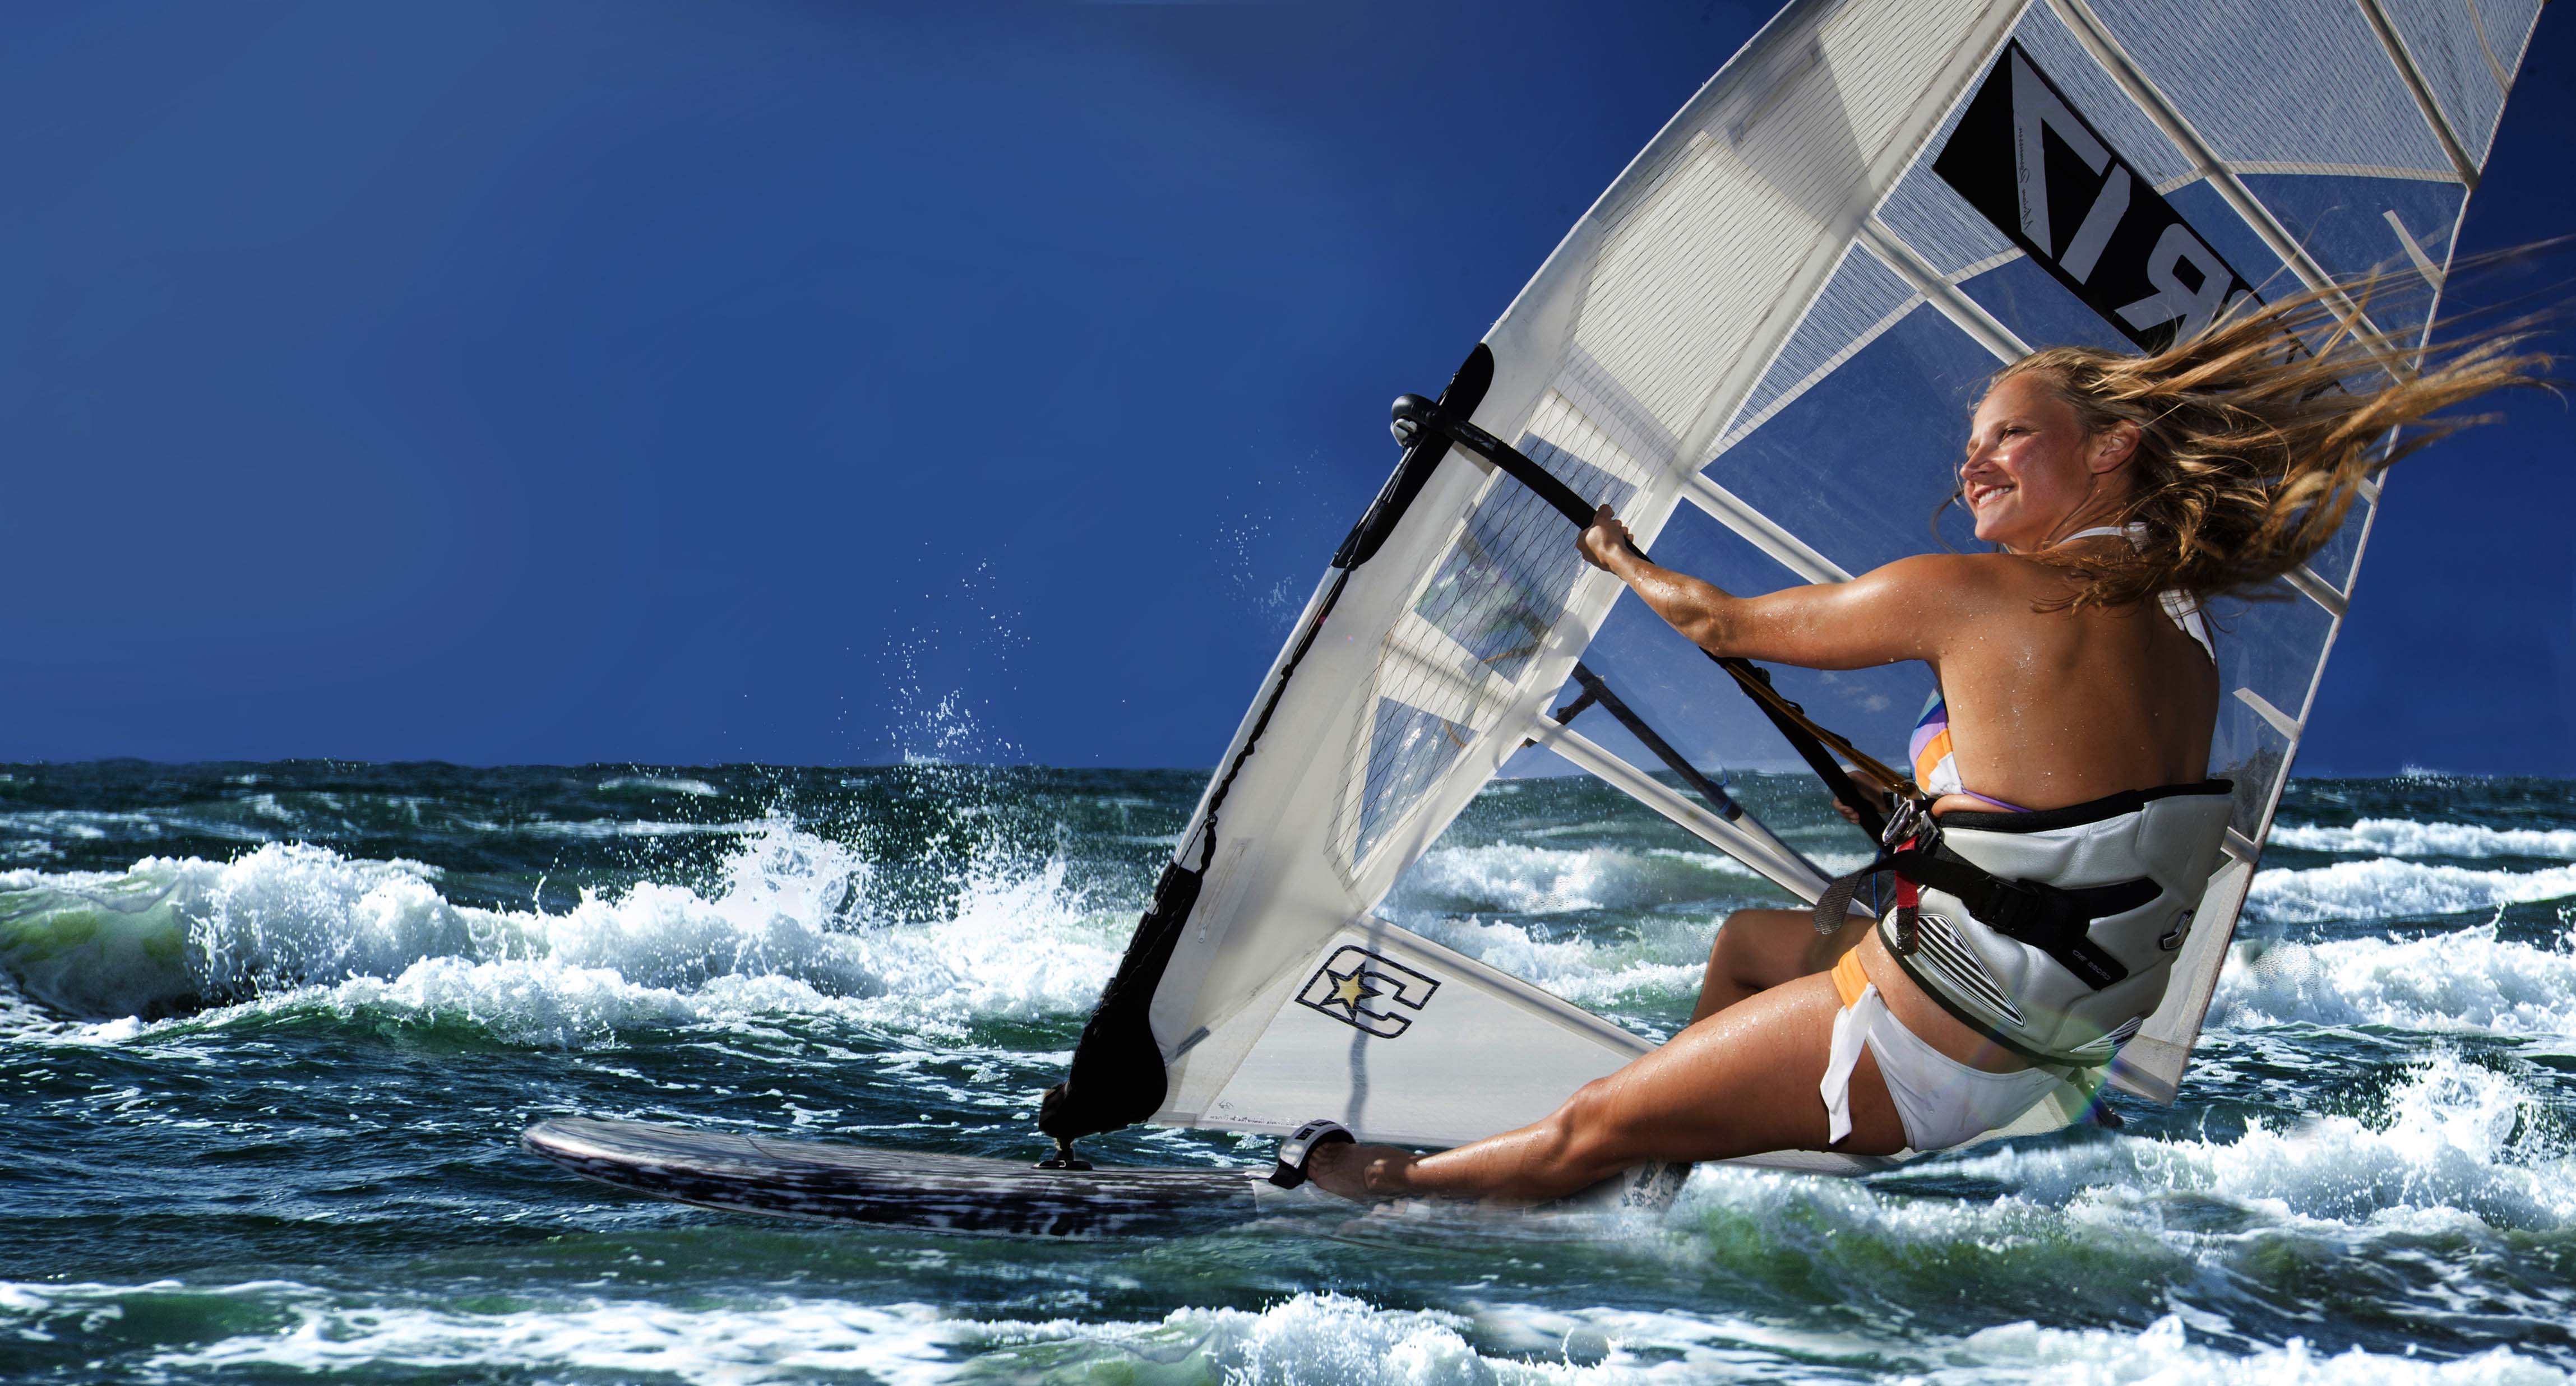 reasons why every girl should start windsurfing!